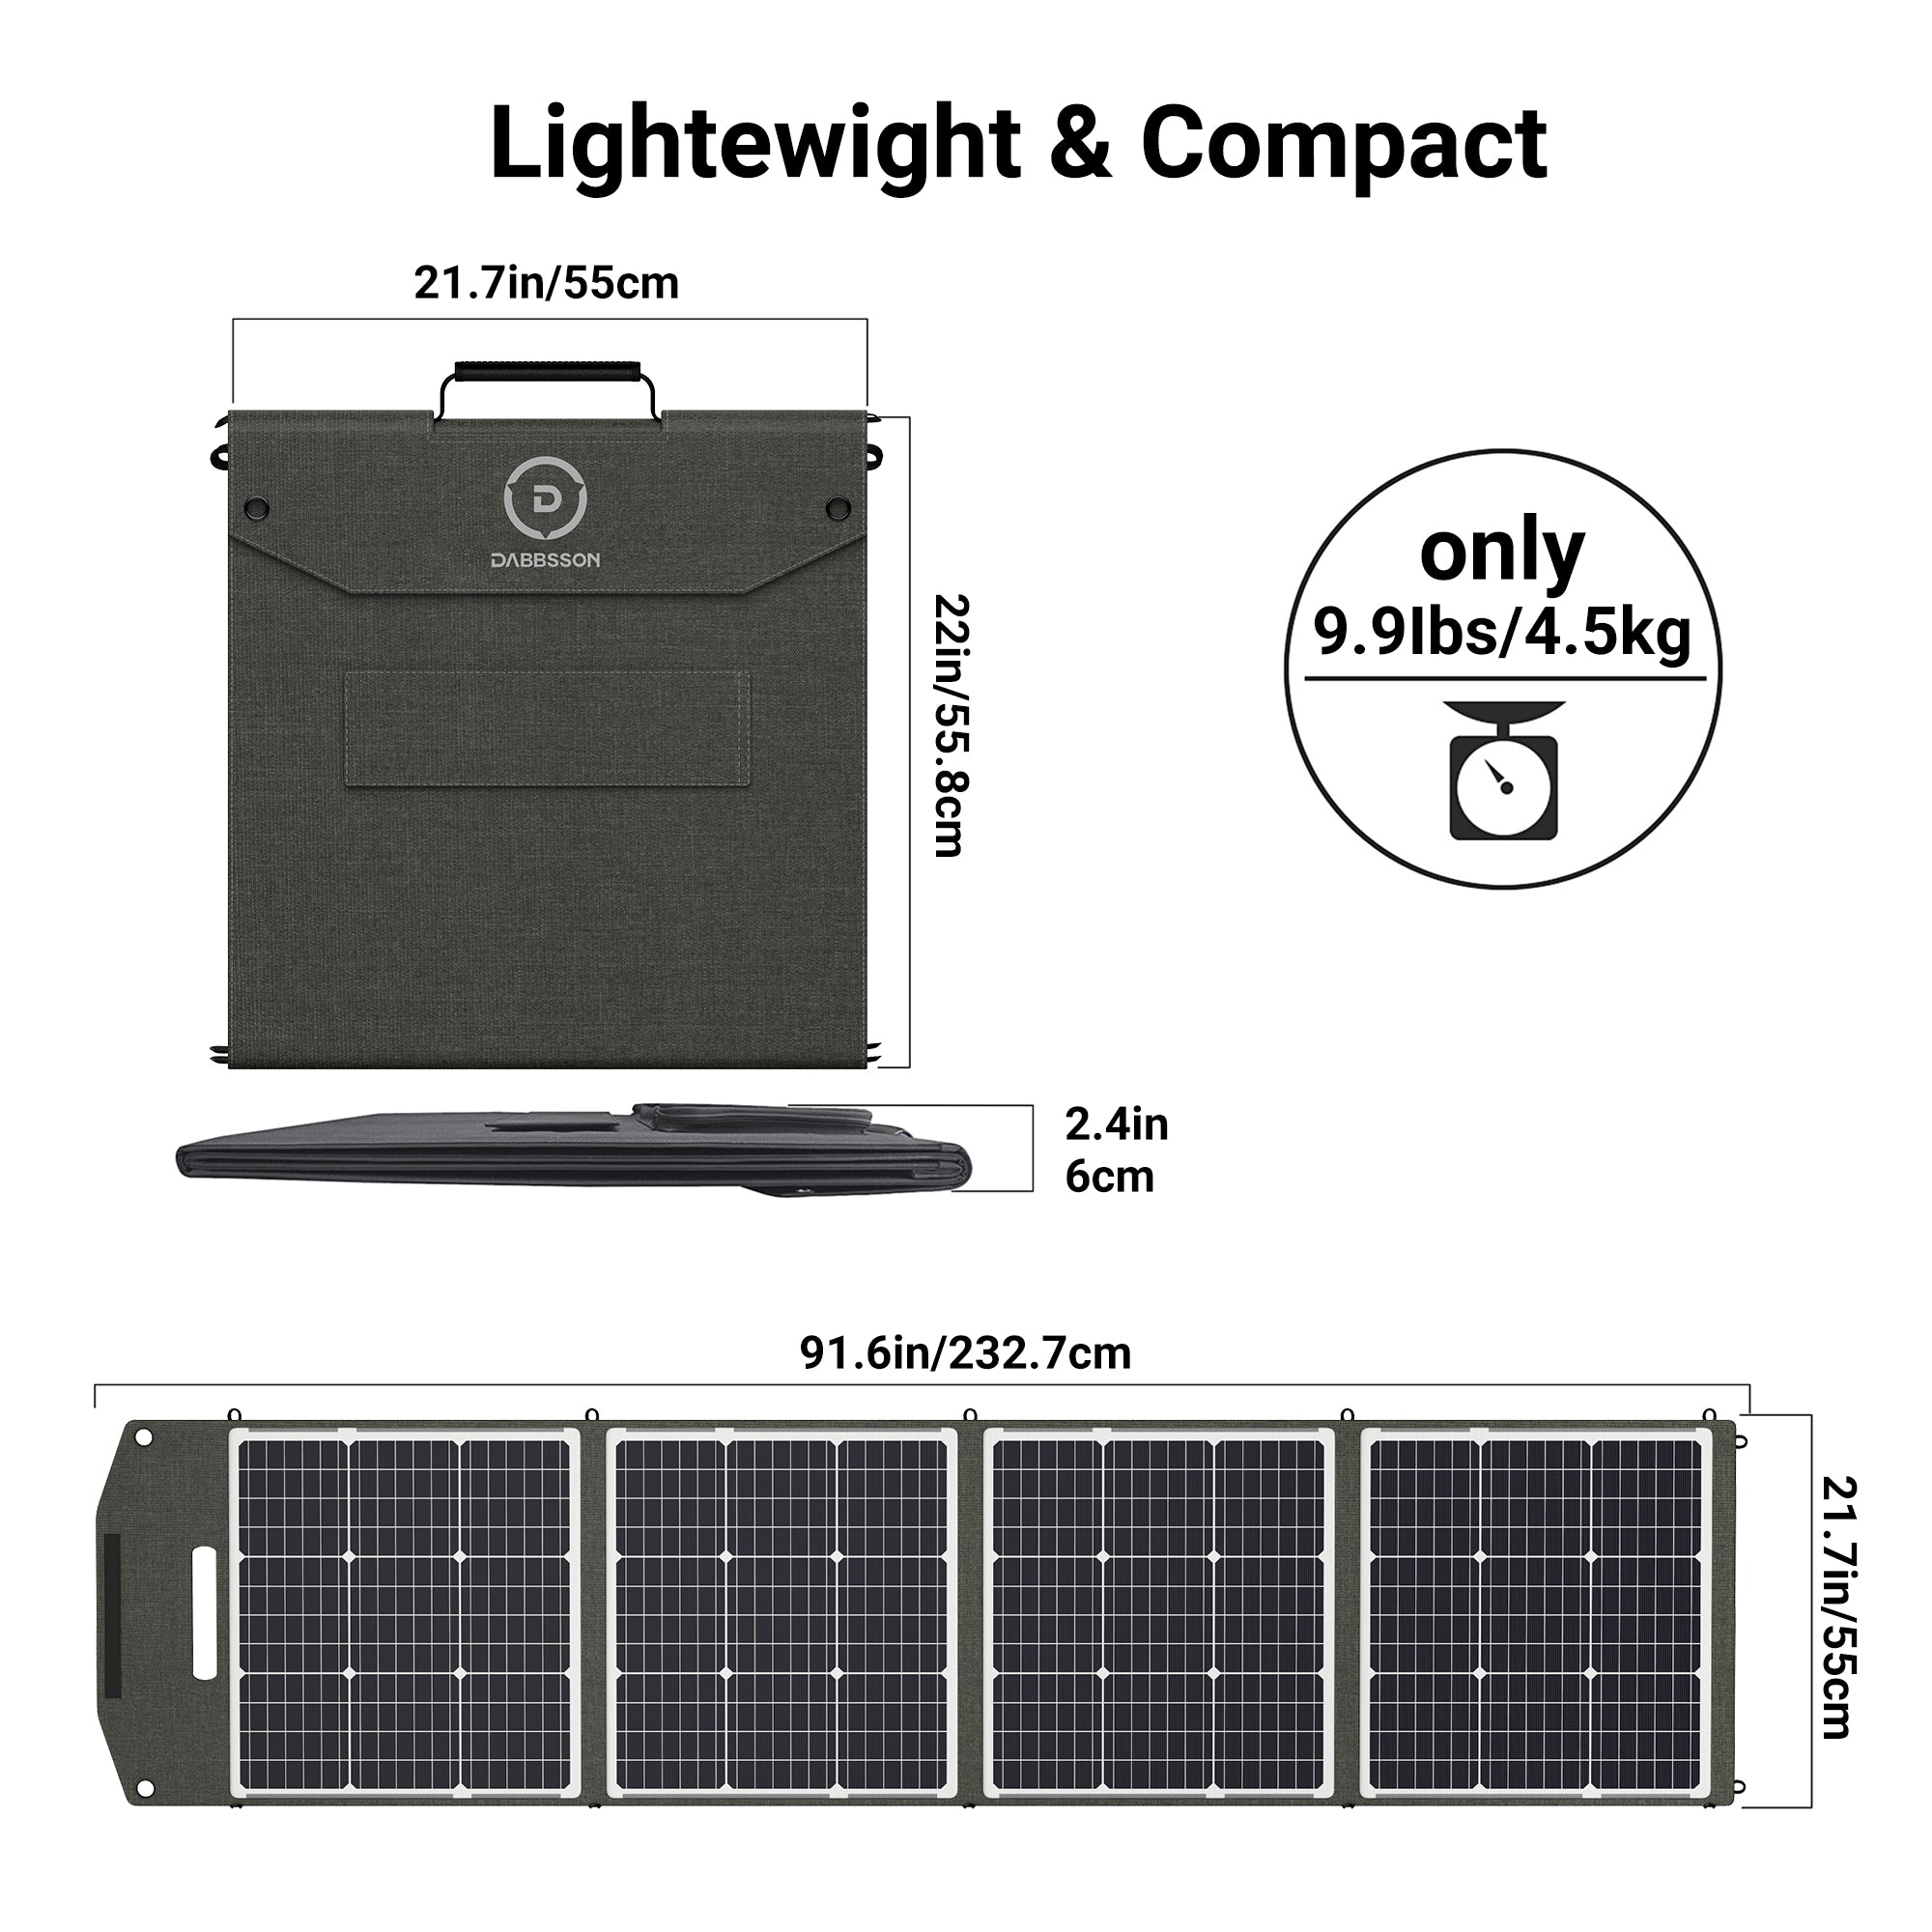 Dabbsson DBS200S Portable Solar Panel for Power Station | 200W - New Star Living